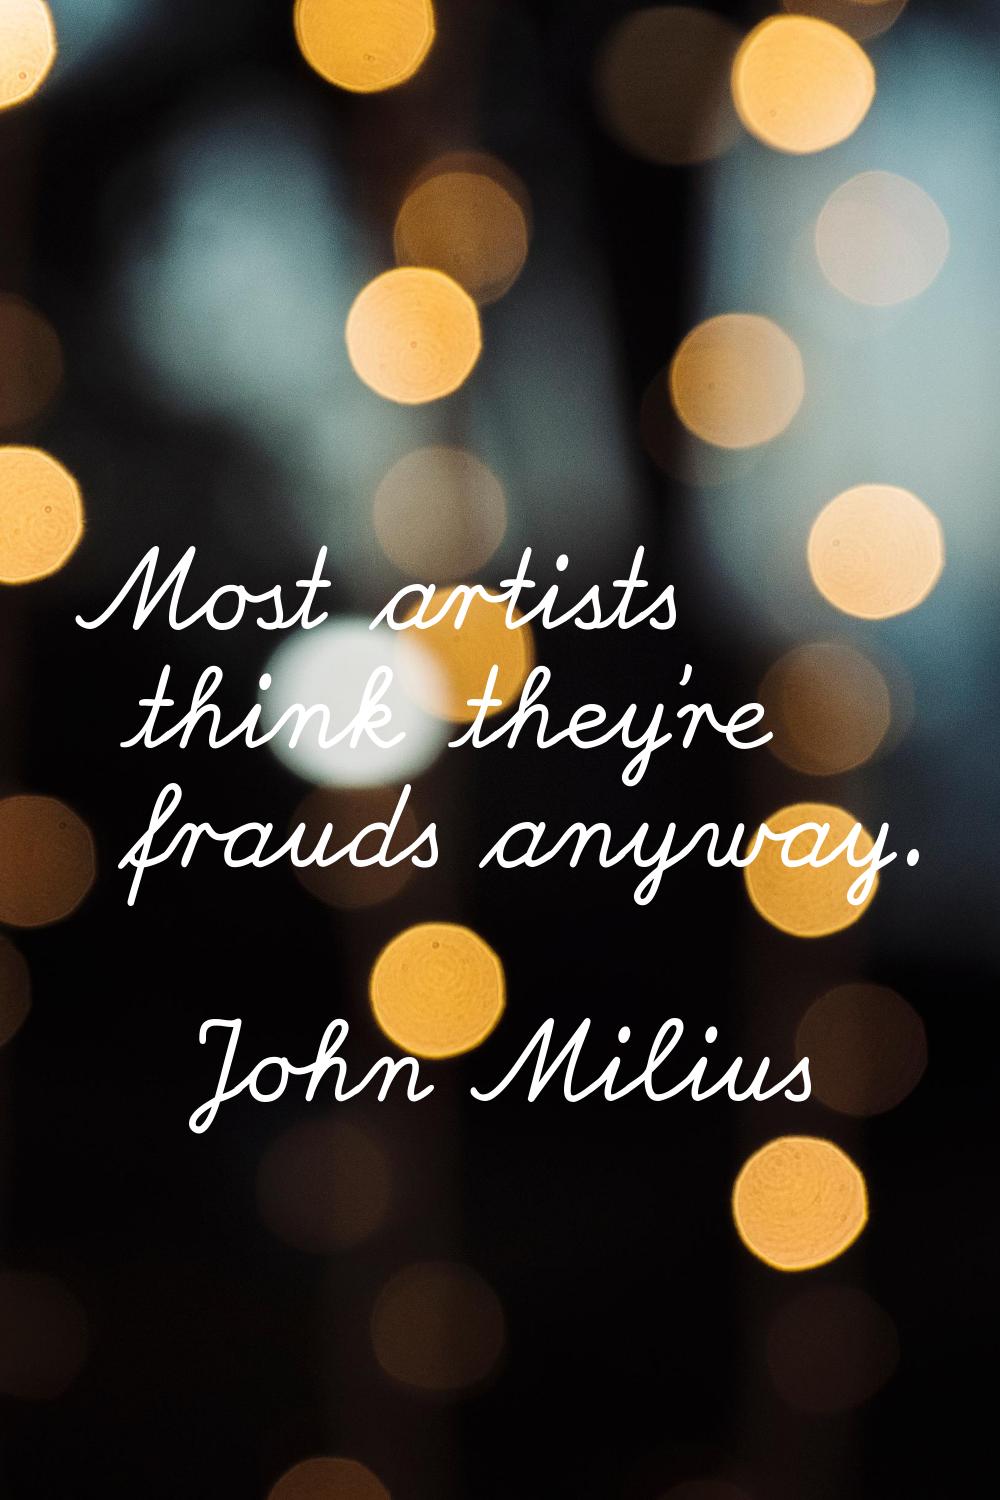 Most artists think they're frauds anyway.